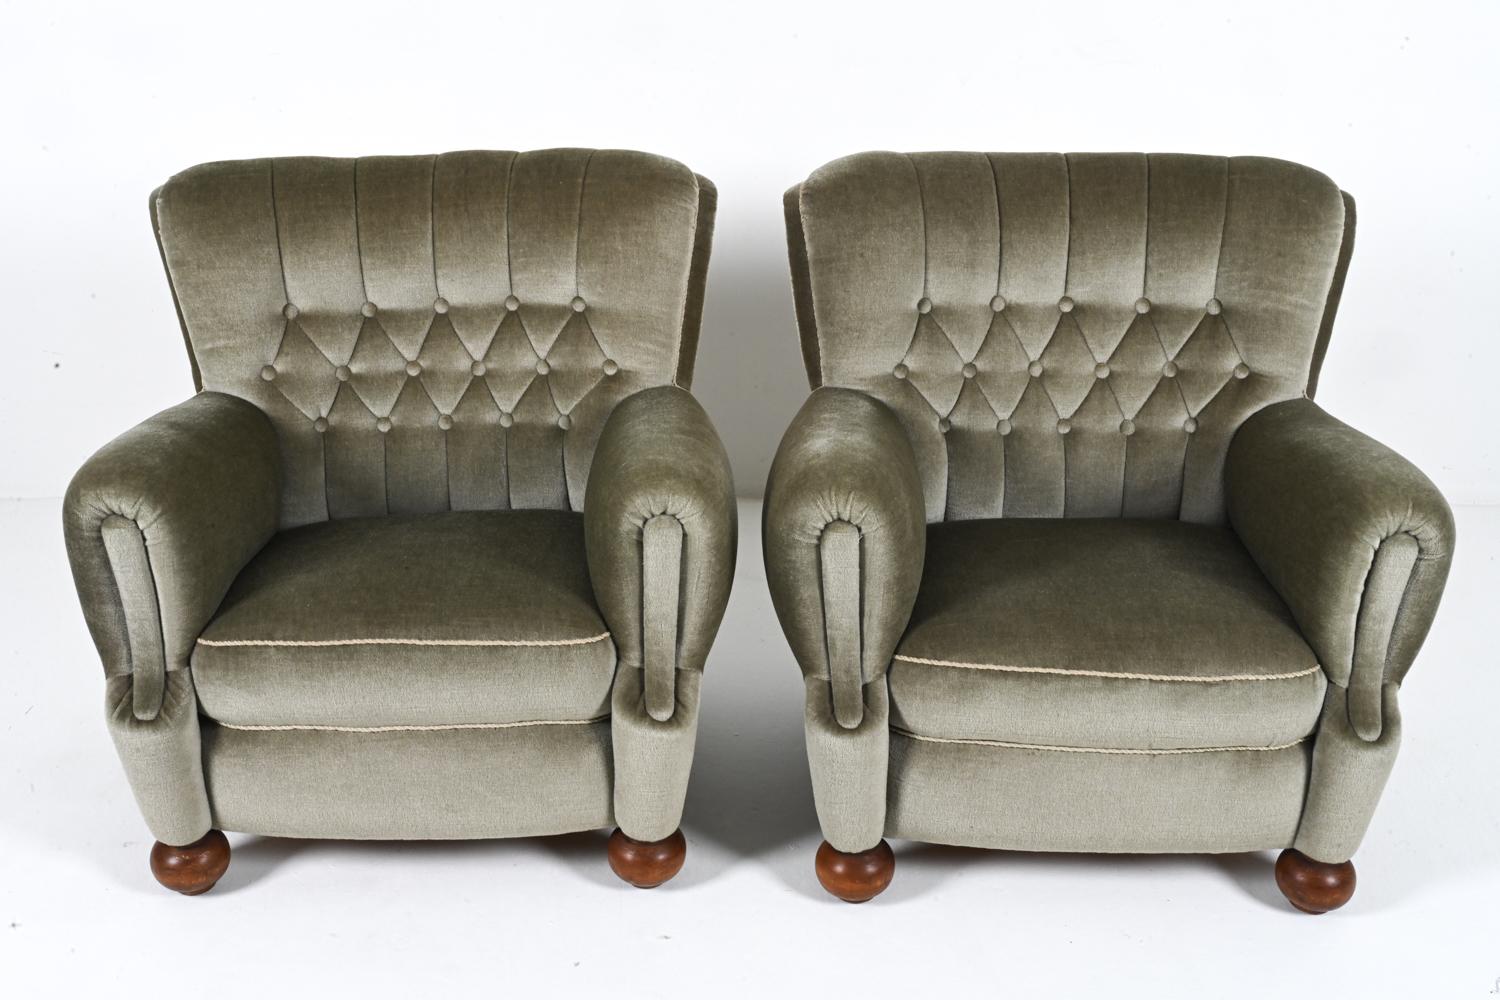 Pair of European Roll-Arm Club Chairs in Mohair and Beech, c. 1940's In Good Condition For Sale In Norwalk, CT